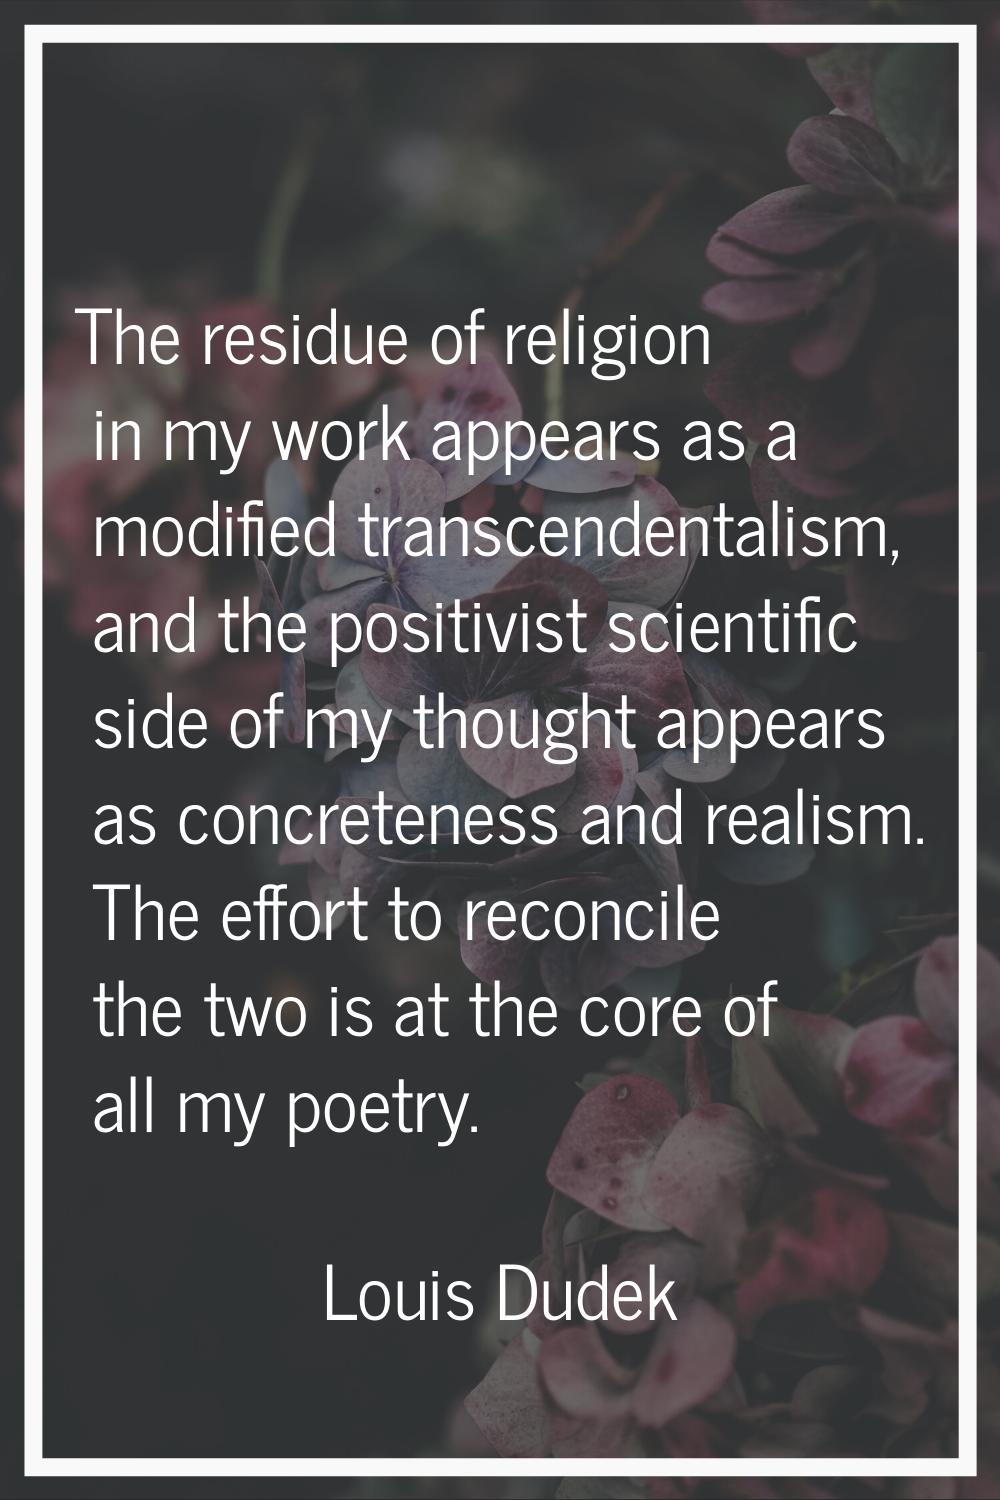 The residue of religion in my work appears as a modified transcendentalism, and the positivist scie